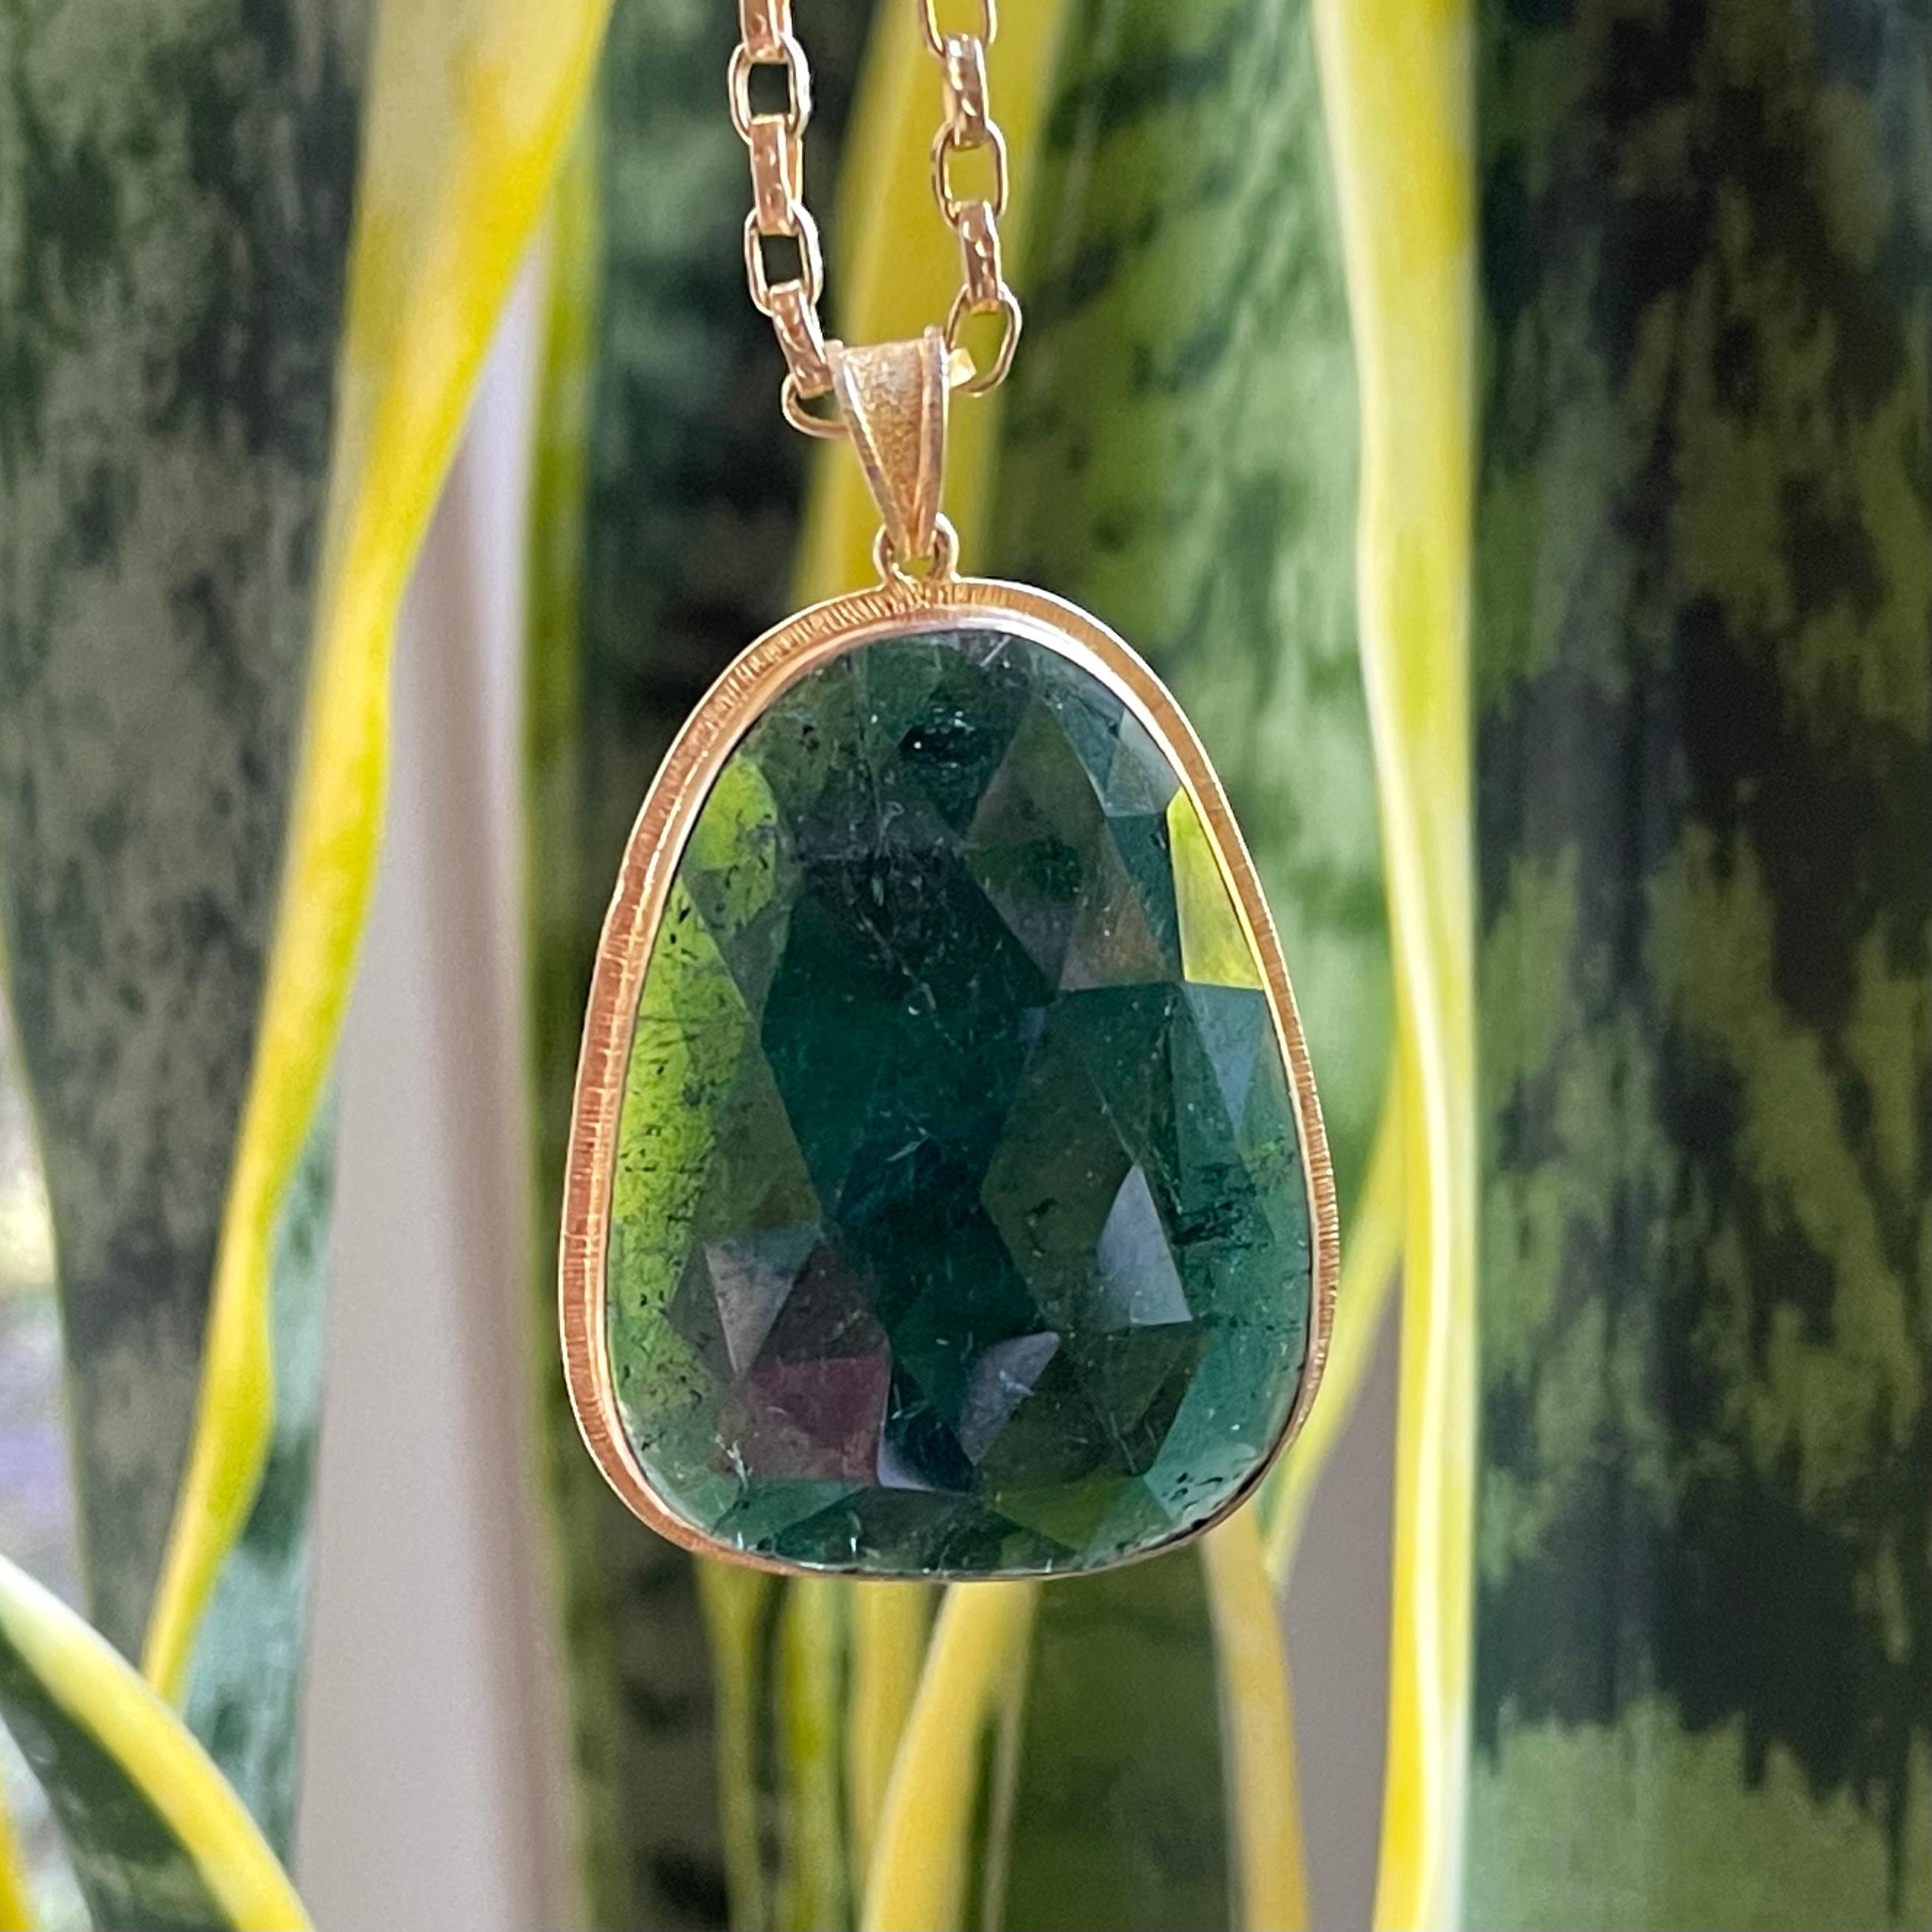 An irregular large rose cut slice of Brazilian green tourmaline is set simply in an organic line texture setting.  A beautiful statement piece !  The chain shown is not included but can be ordered addtionally.

